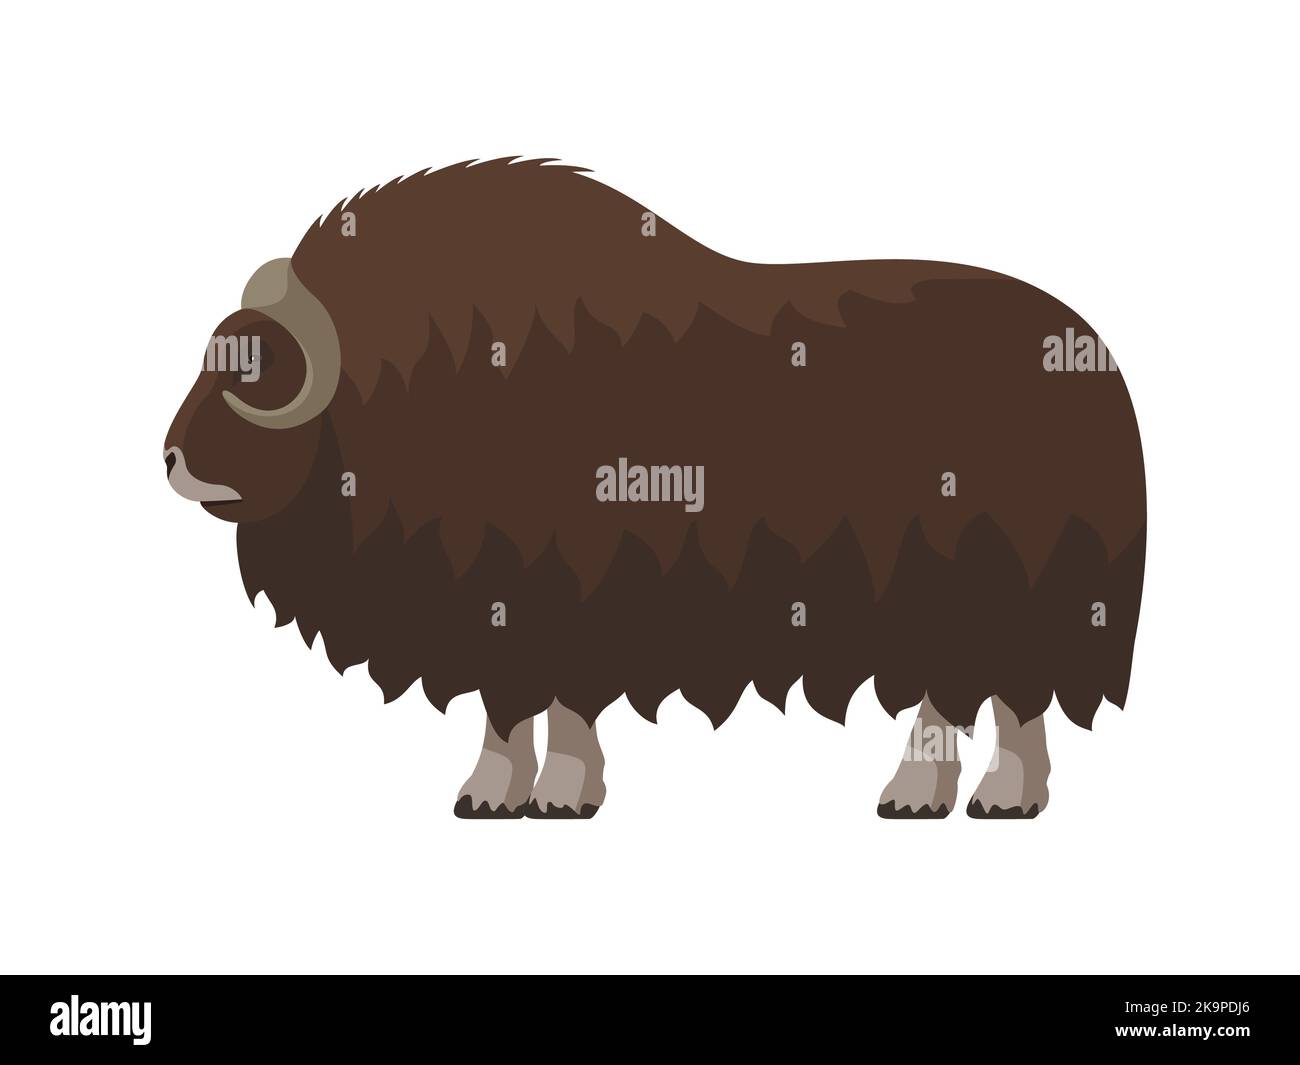 Muskox with thick fur. Vector illustration of a brown muskox with horns and thick fur isolated on white. Flat design, side view. Stock Vector